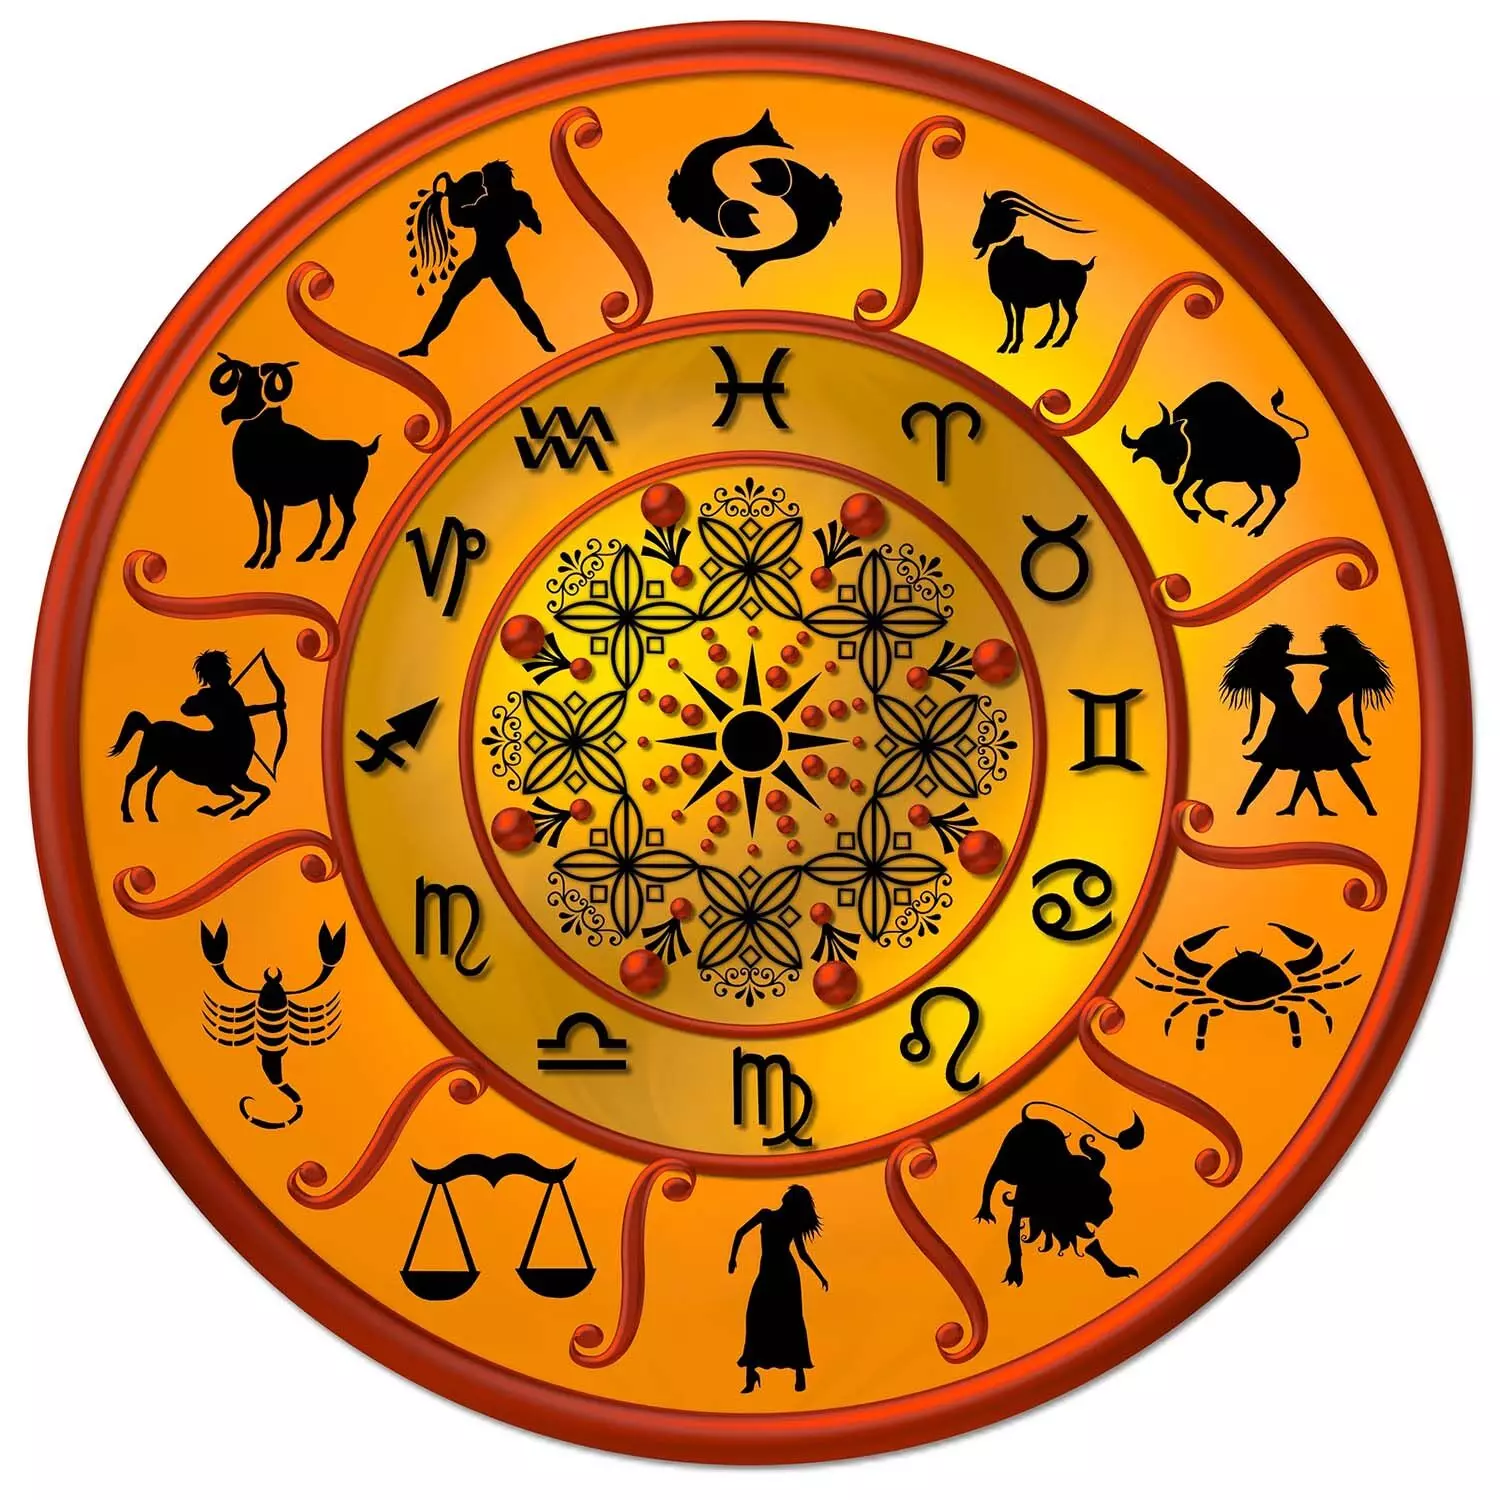 19 June – Know your todays horoscope